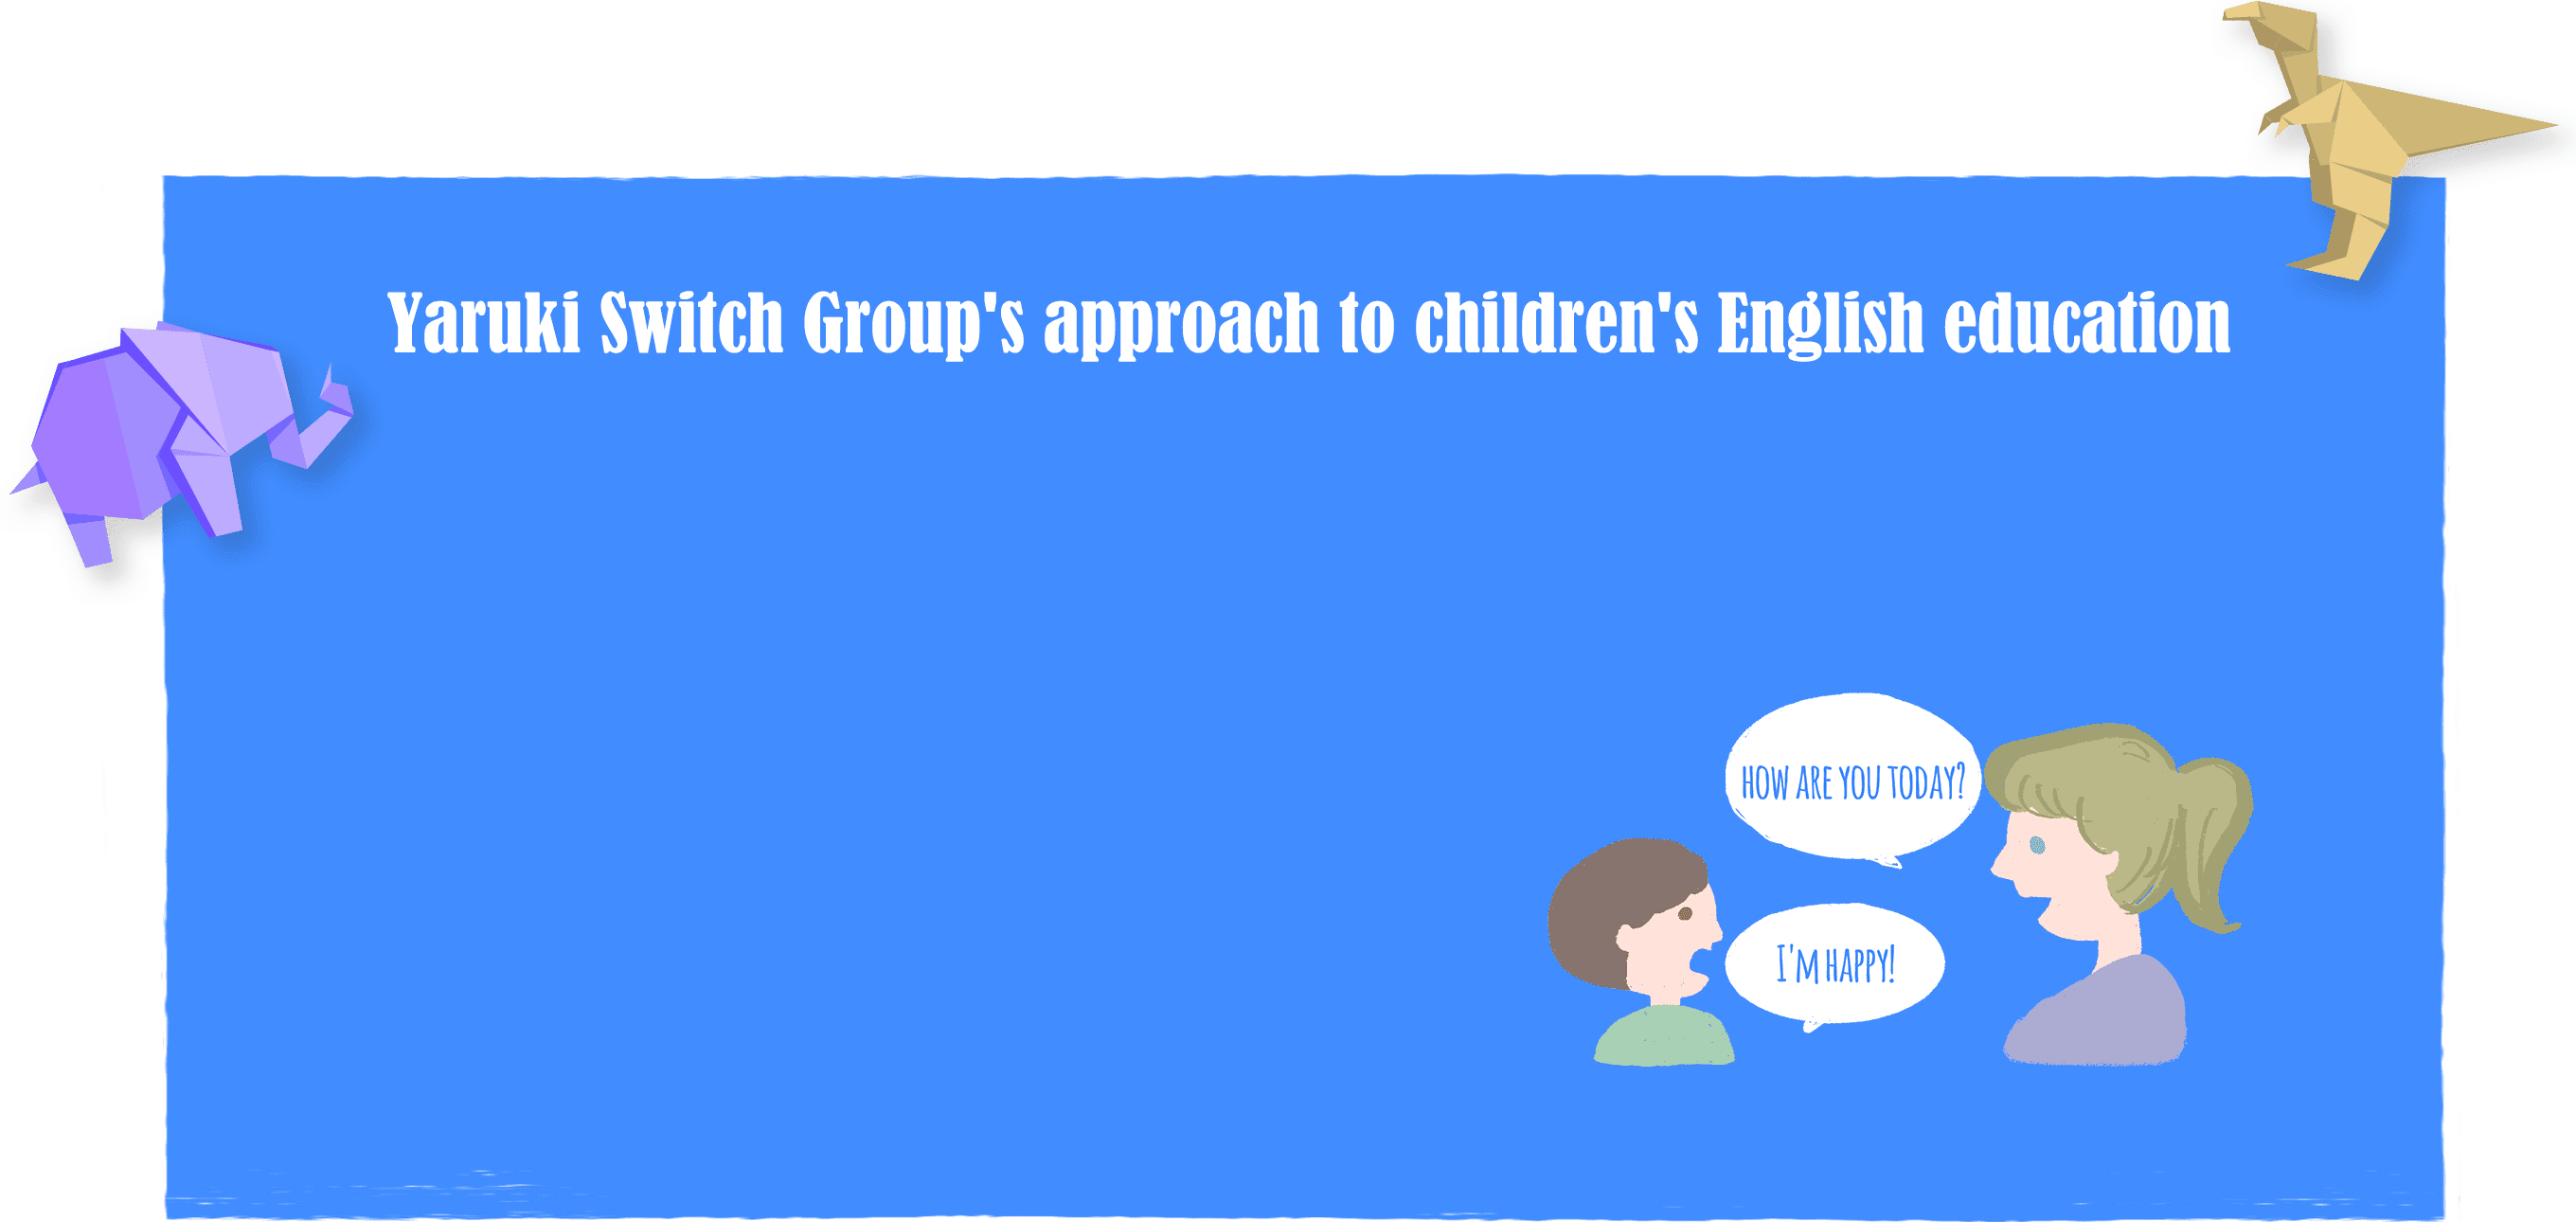 Yaruki Switch Group's approach to children's English education